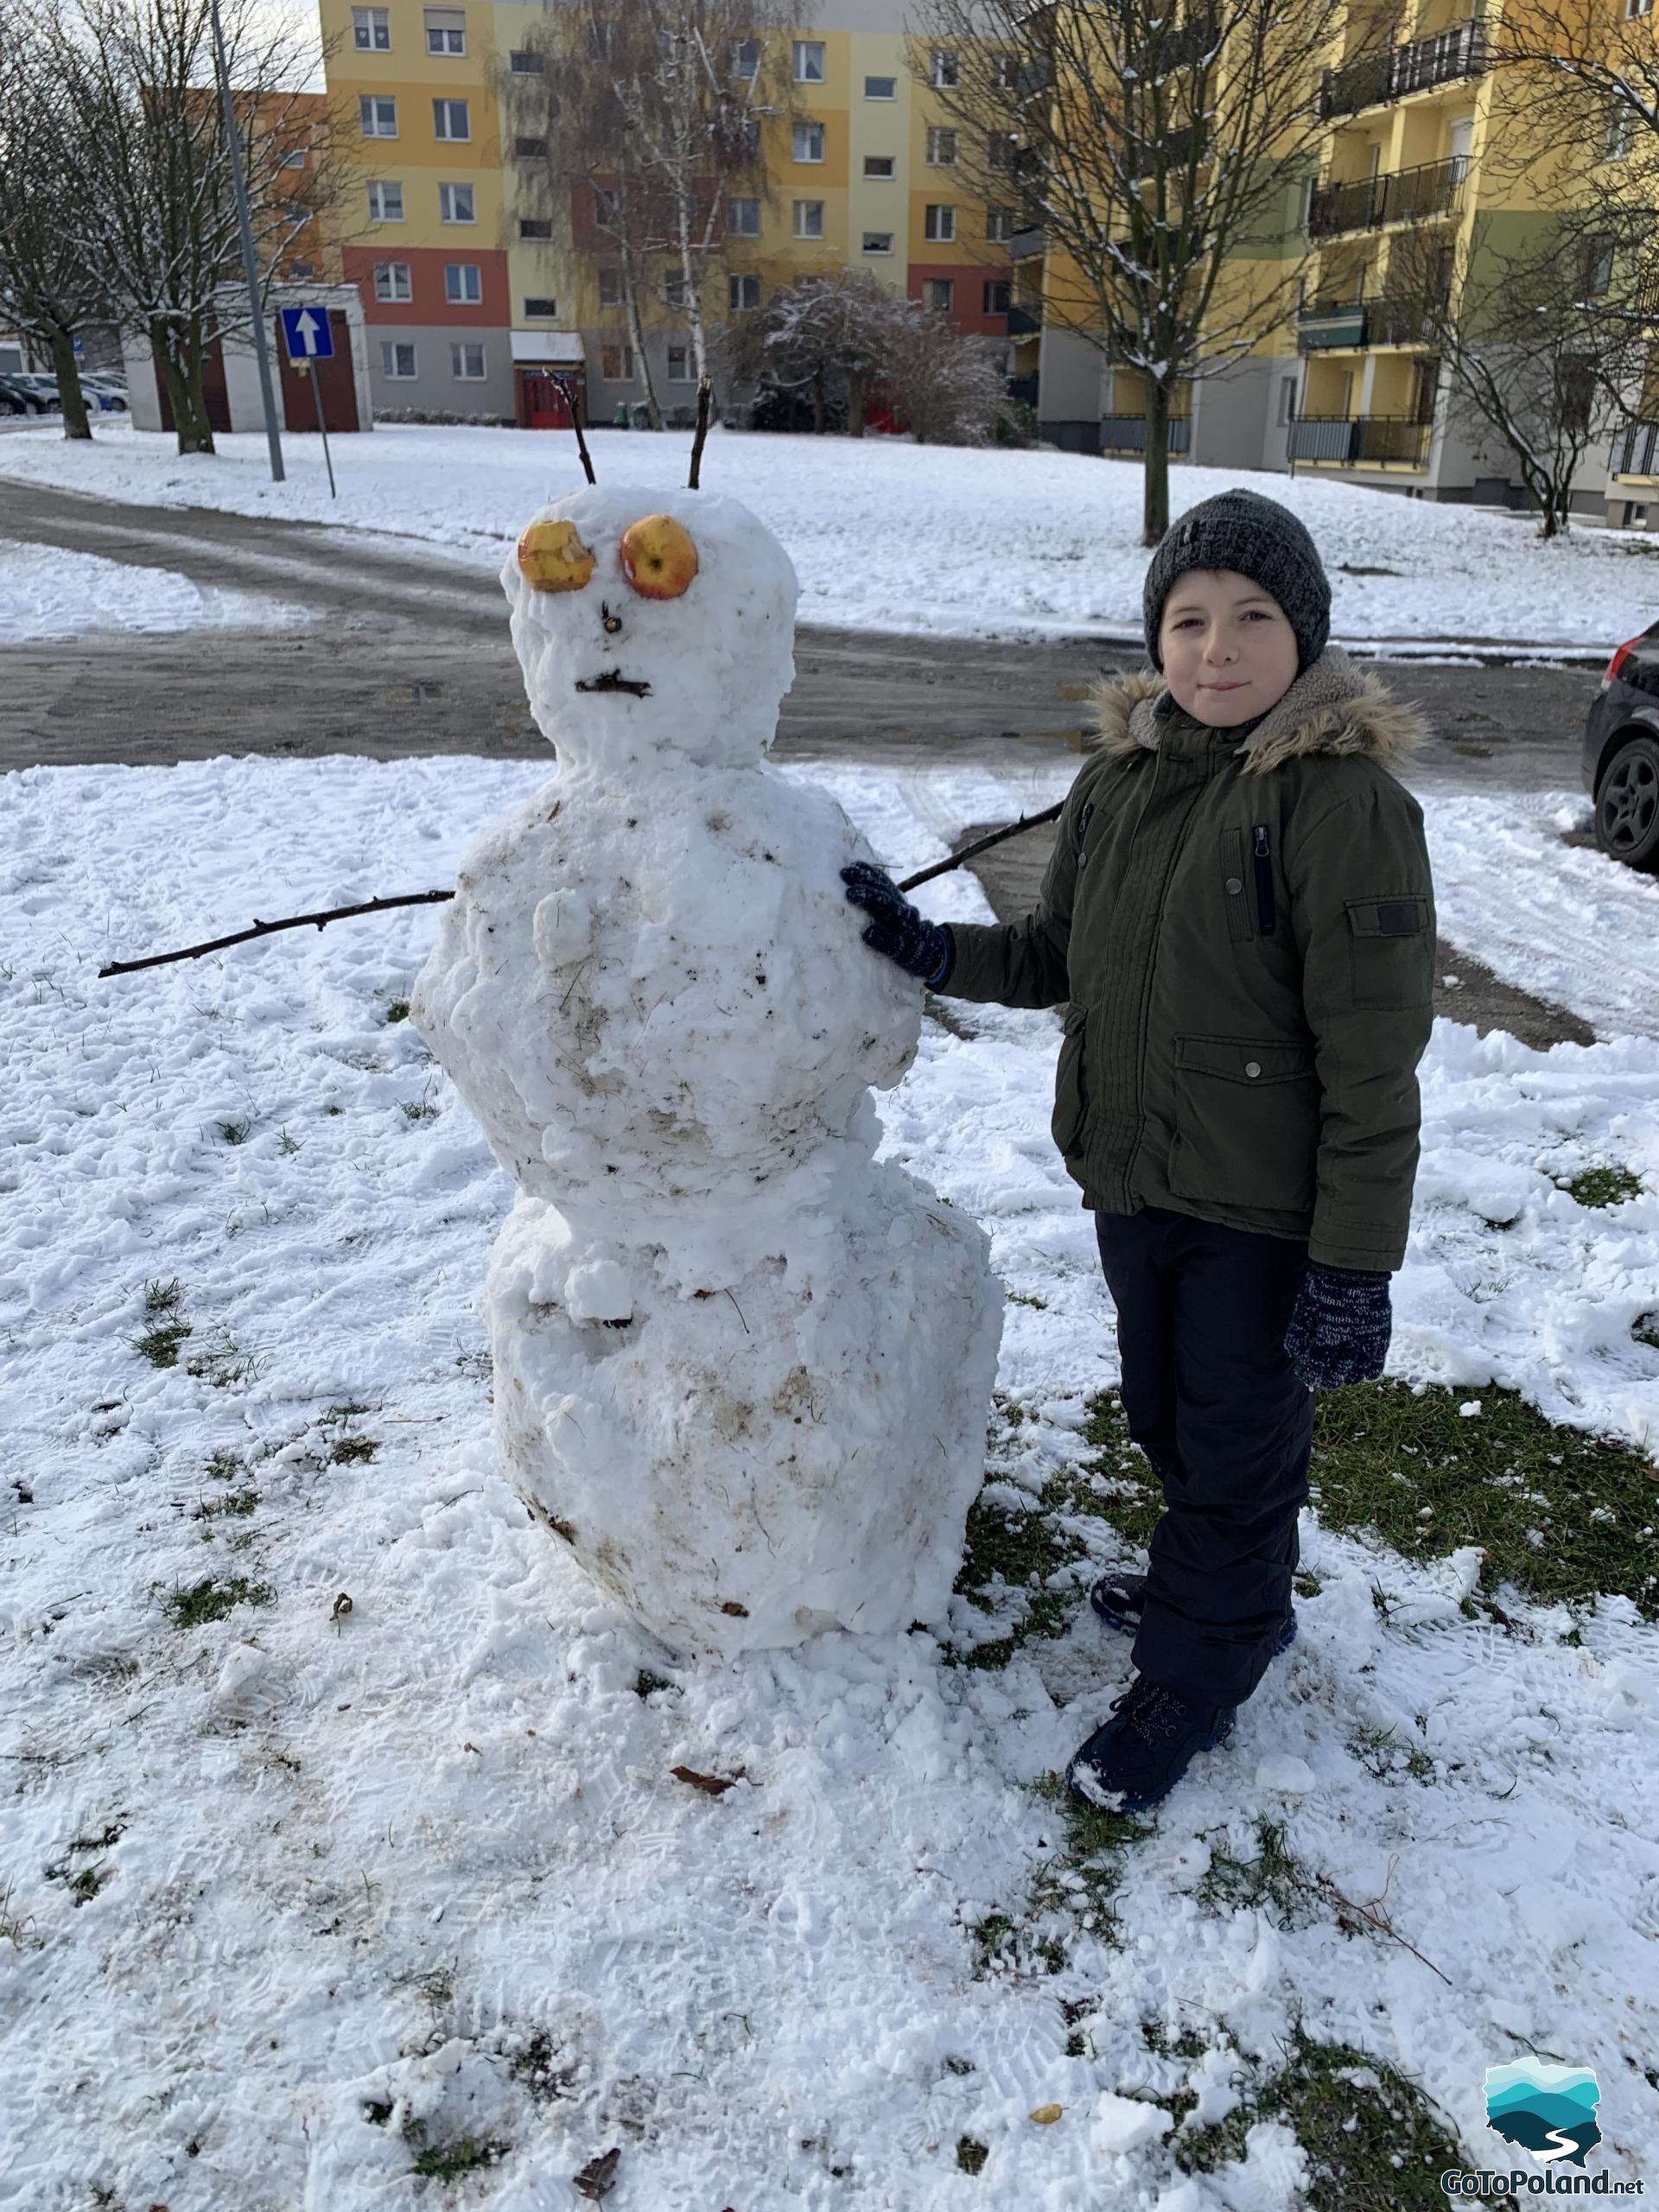 A young boy with a big snowman who has big eyes made of apples 